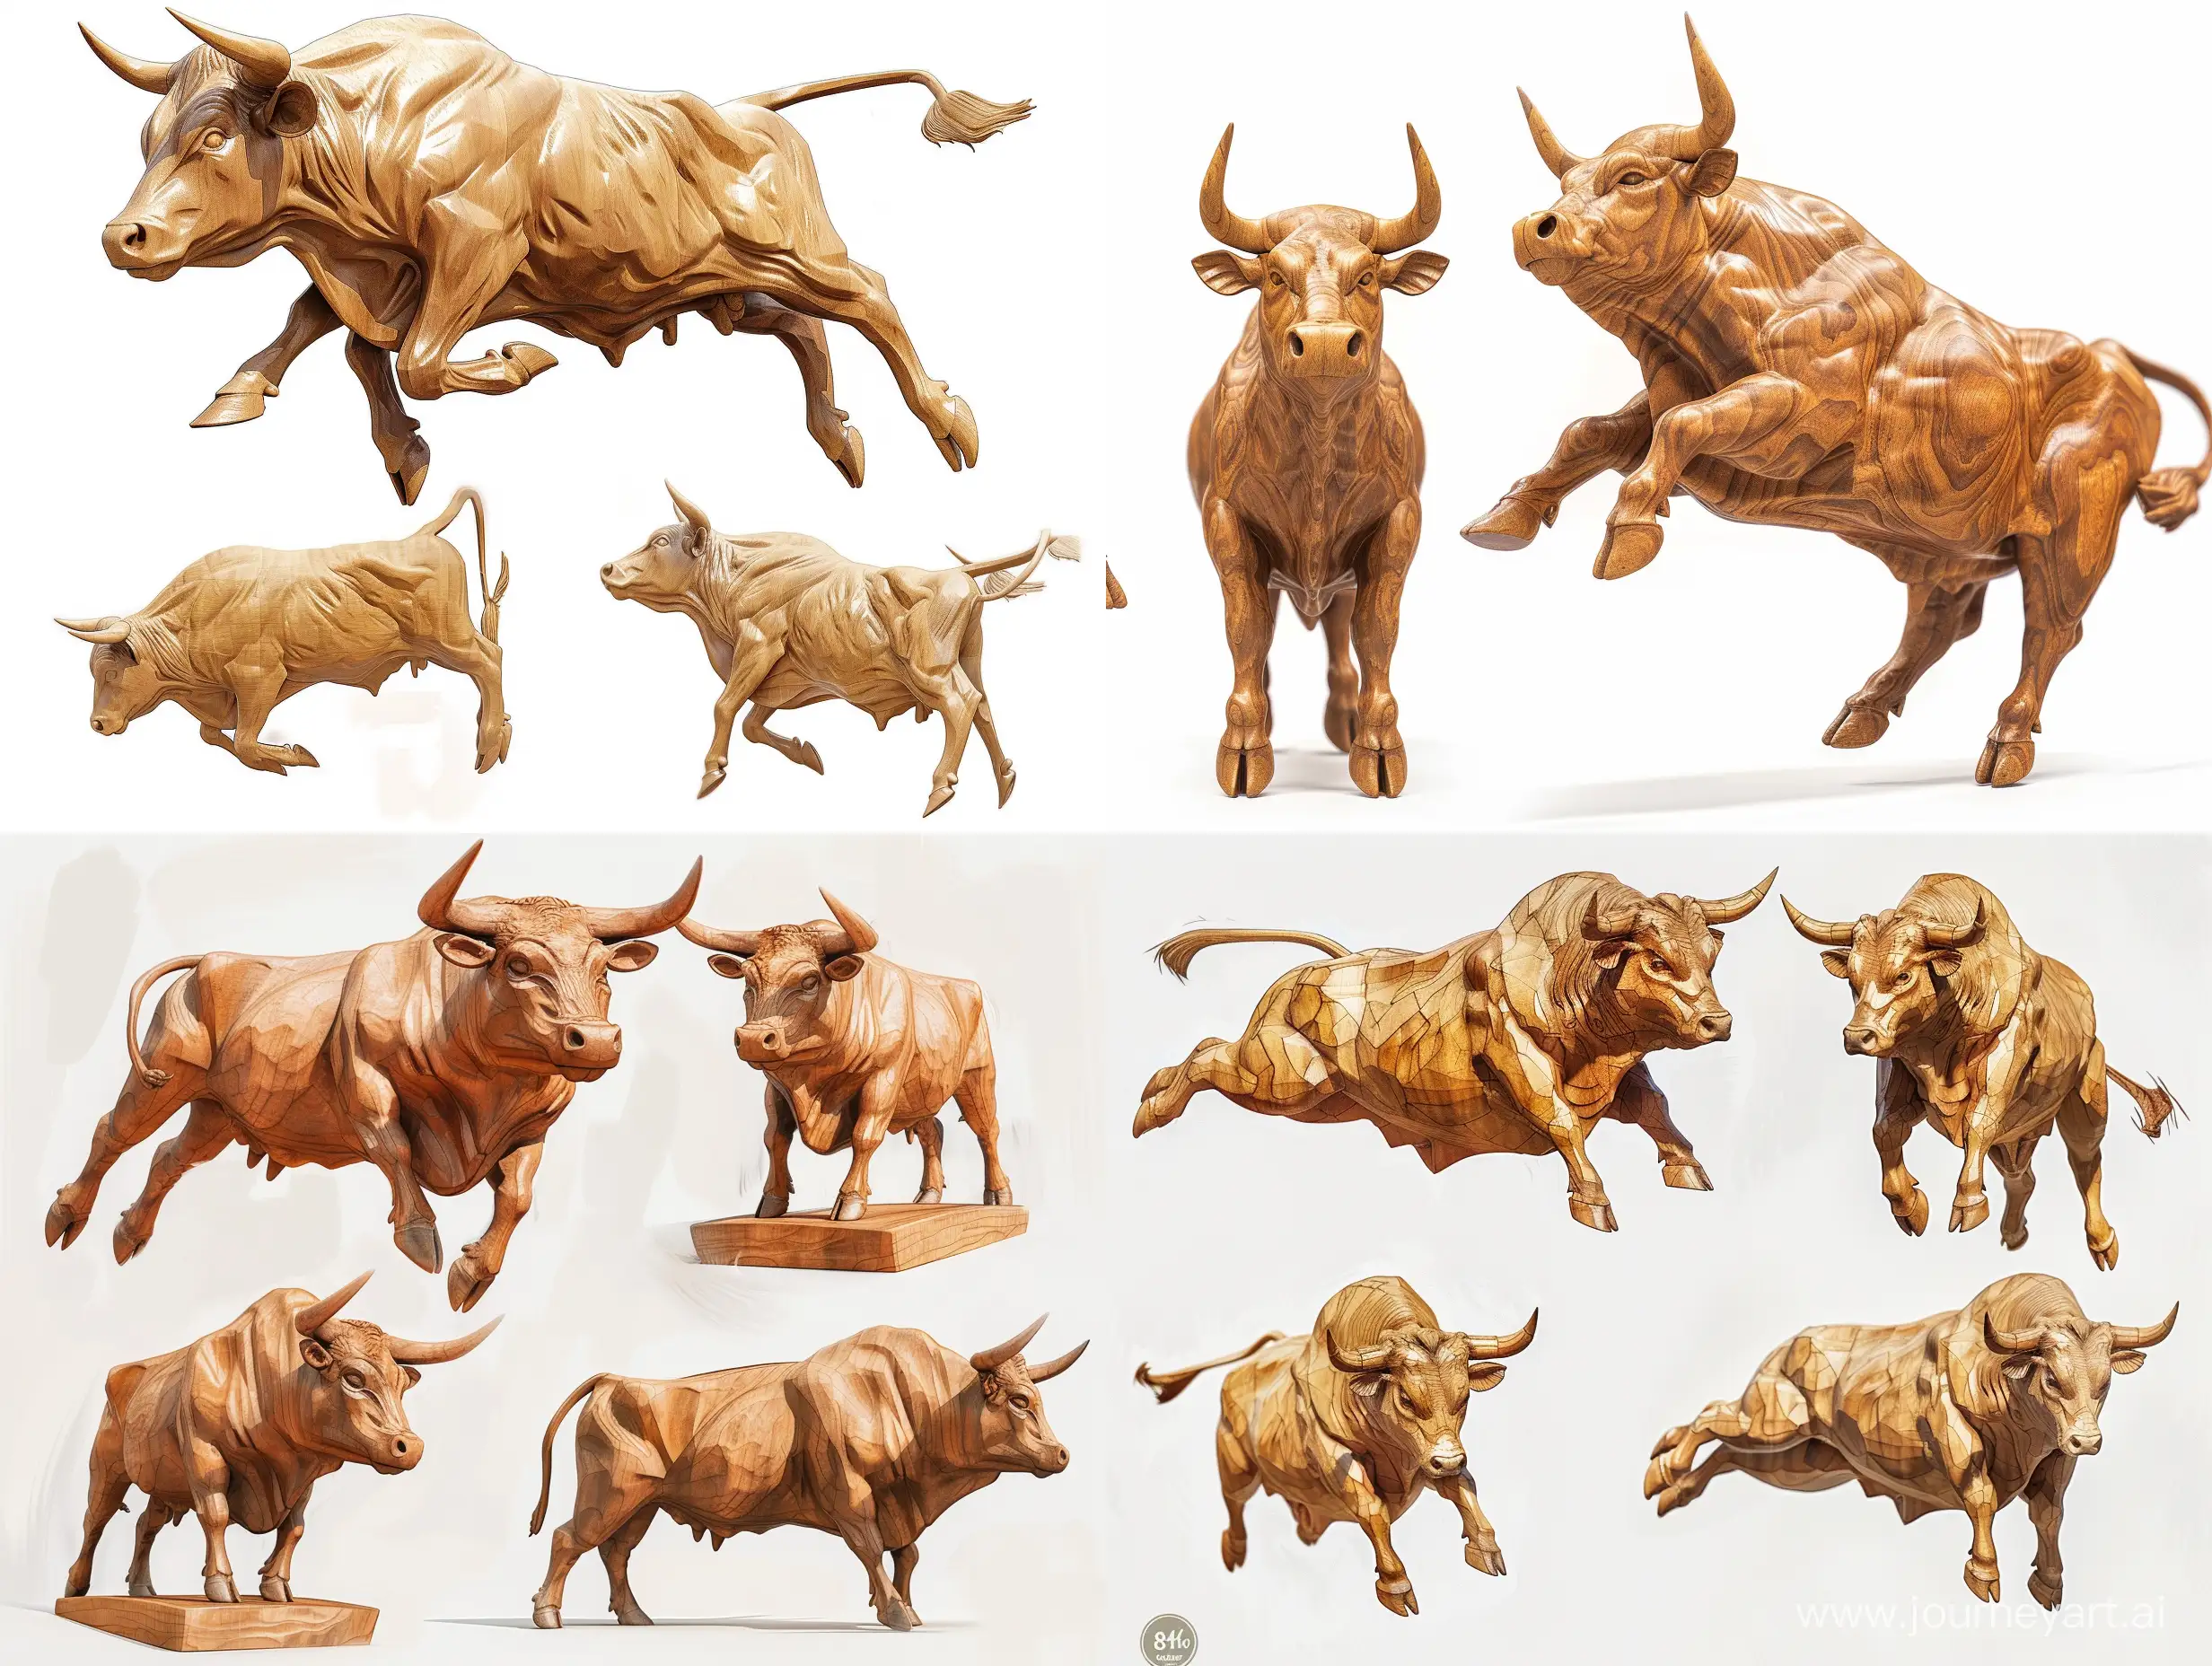 Dynamic-Bull-Sculpture-Professional-Wooden-Carving-in-FullFace-and-Profile-Views